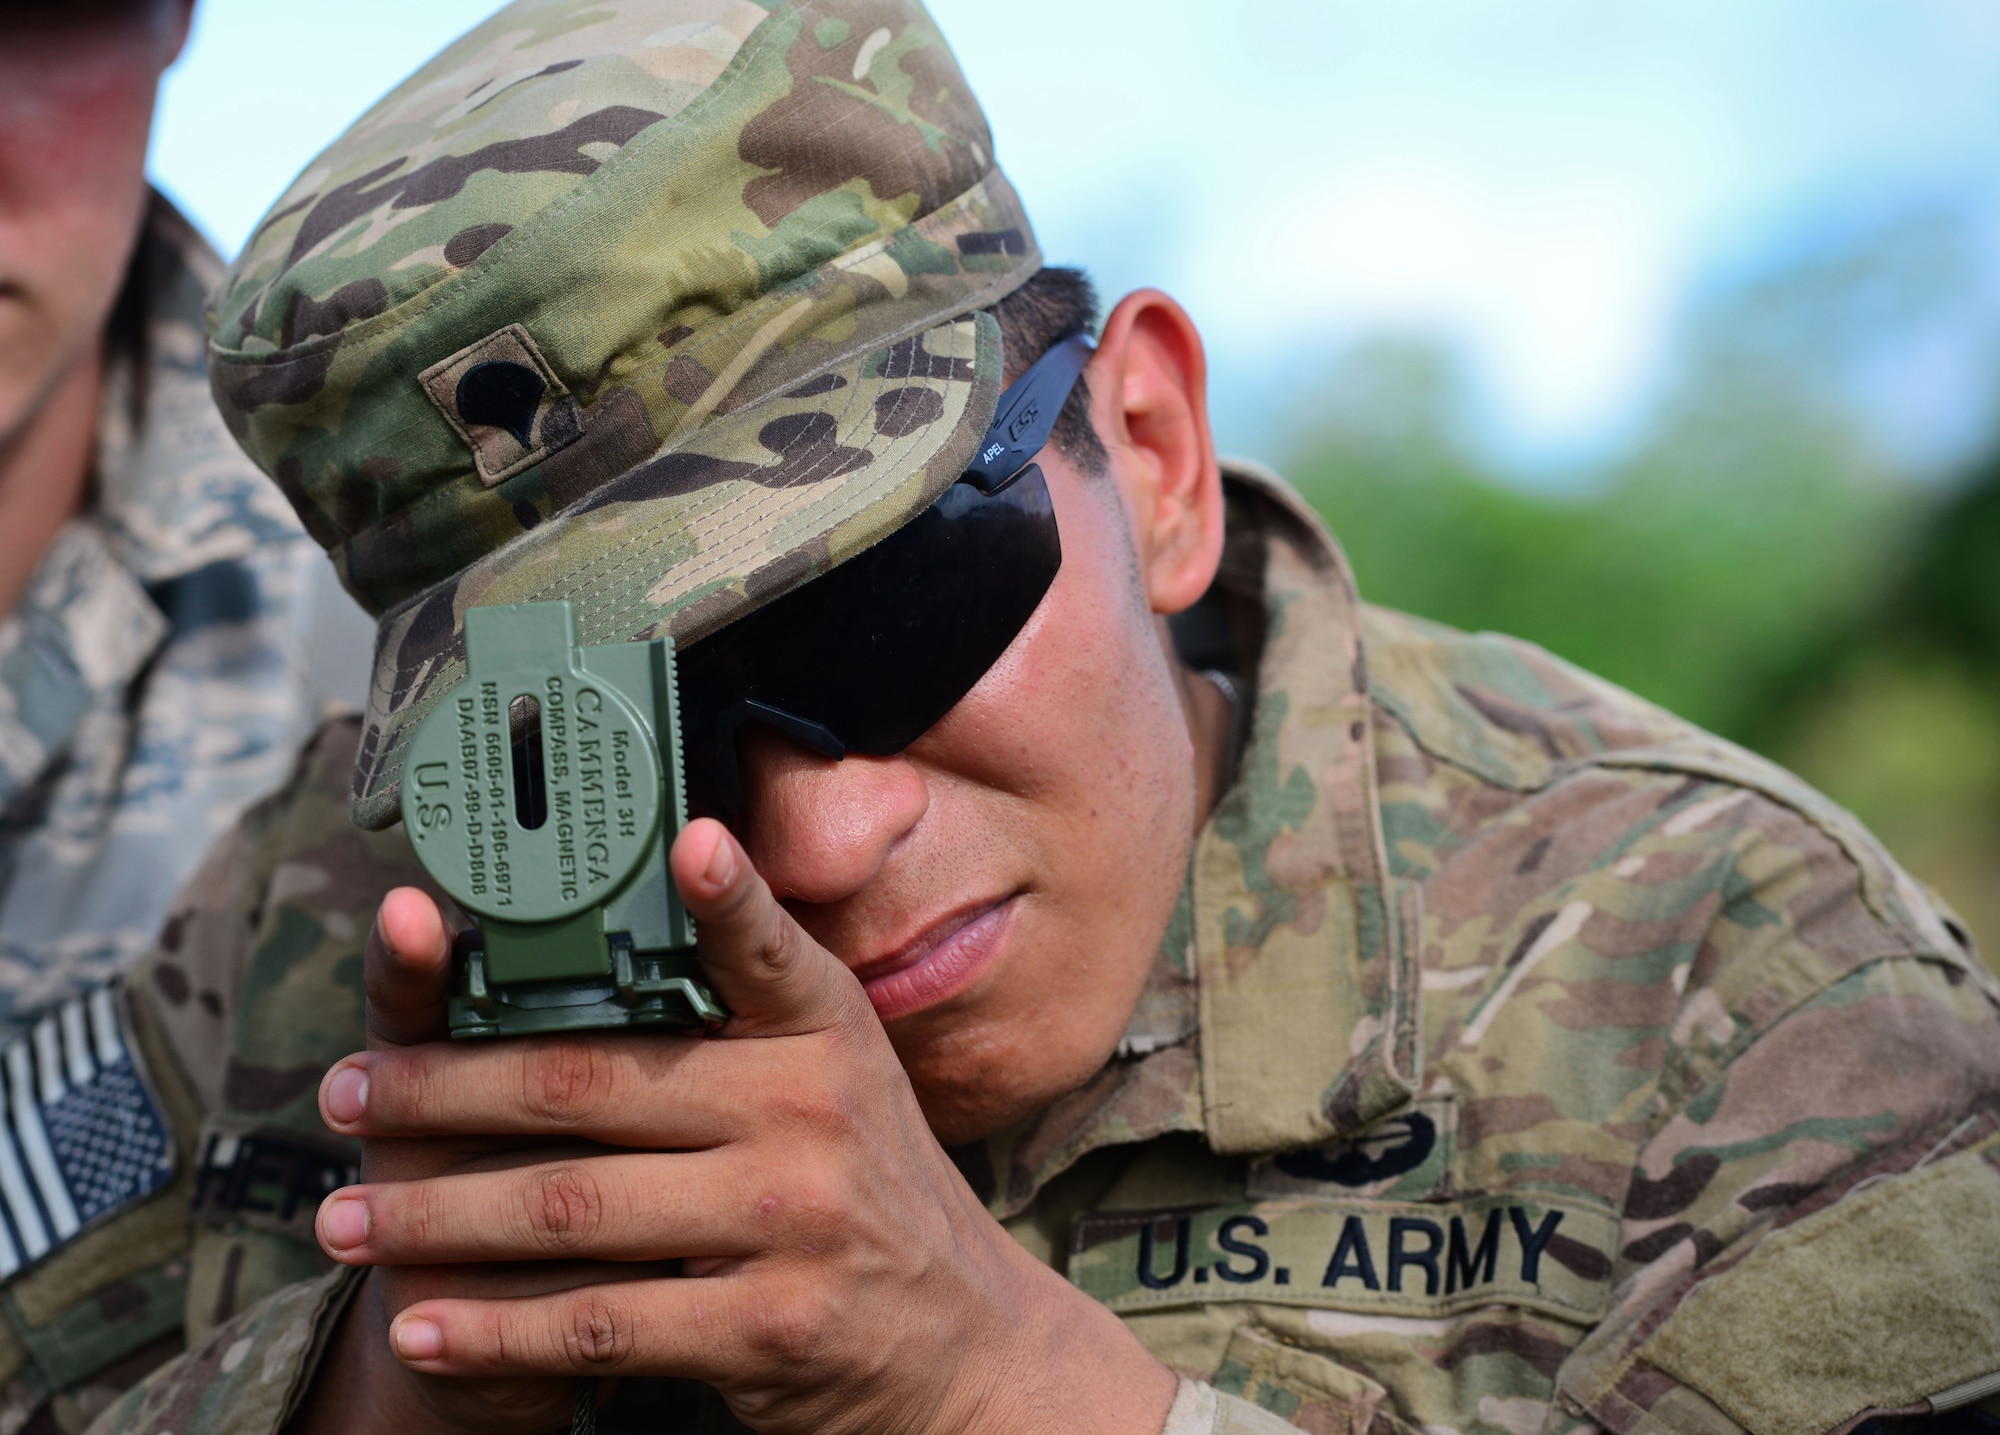 U.S. Army Spc. Matthew Hernandez, Jungle Training Operations Course student from the 94th Army Air and Missile Defense Command’s Task Force Talon, takes a compass reading June 16, 2016, at Andersen Air Force Base South, Guam. Conducted by the U.S. Army 25th Infantry Division's Lightning Academy Jungle Operations Training Center from Schofield Barracks, Hawaii, and supported by 736th Security Forces Squadron Commando Warrior cadre, more than 30 Airmen and Soldiers learned the fundamentals of survival skills, including land navigation and evasion techniques. (U.S. Air Force photo by Senior Airman Joshua Smoot)